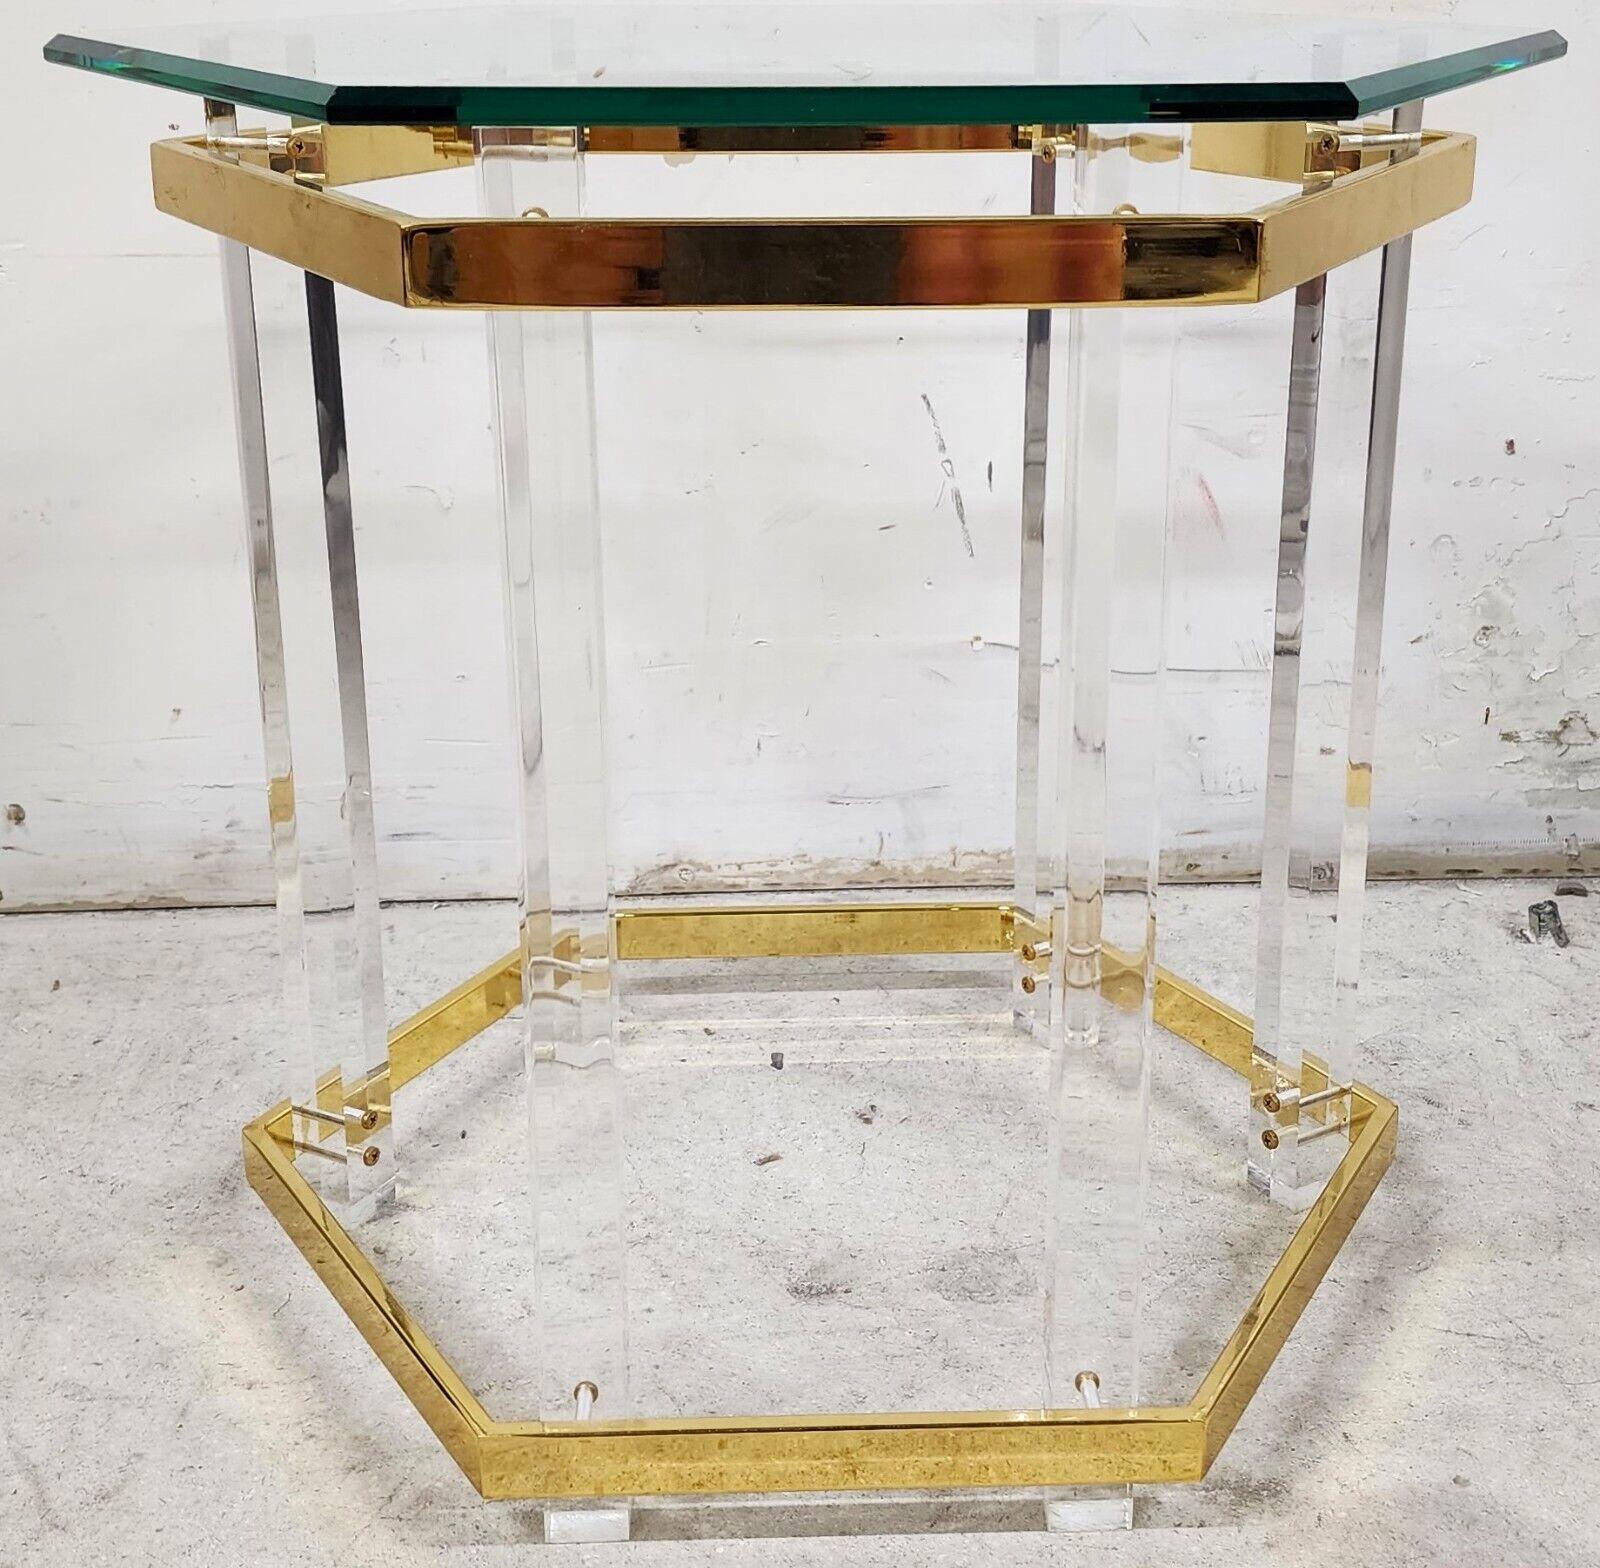 Charles Hollis Jones Style lucite, glass & 24 karat gold plated side table by Regency House of North Carolina
The gold plating prevents any deterioration of the metal surfaces.
The beveled edge glass top is original.

Approximate measurements in